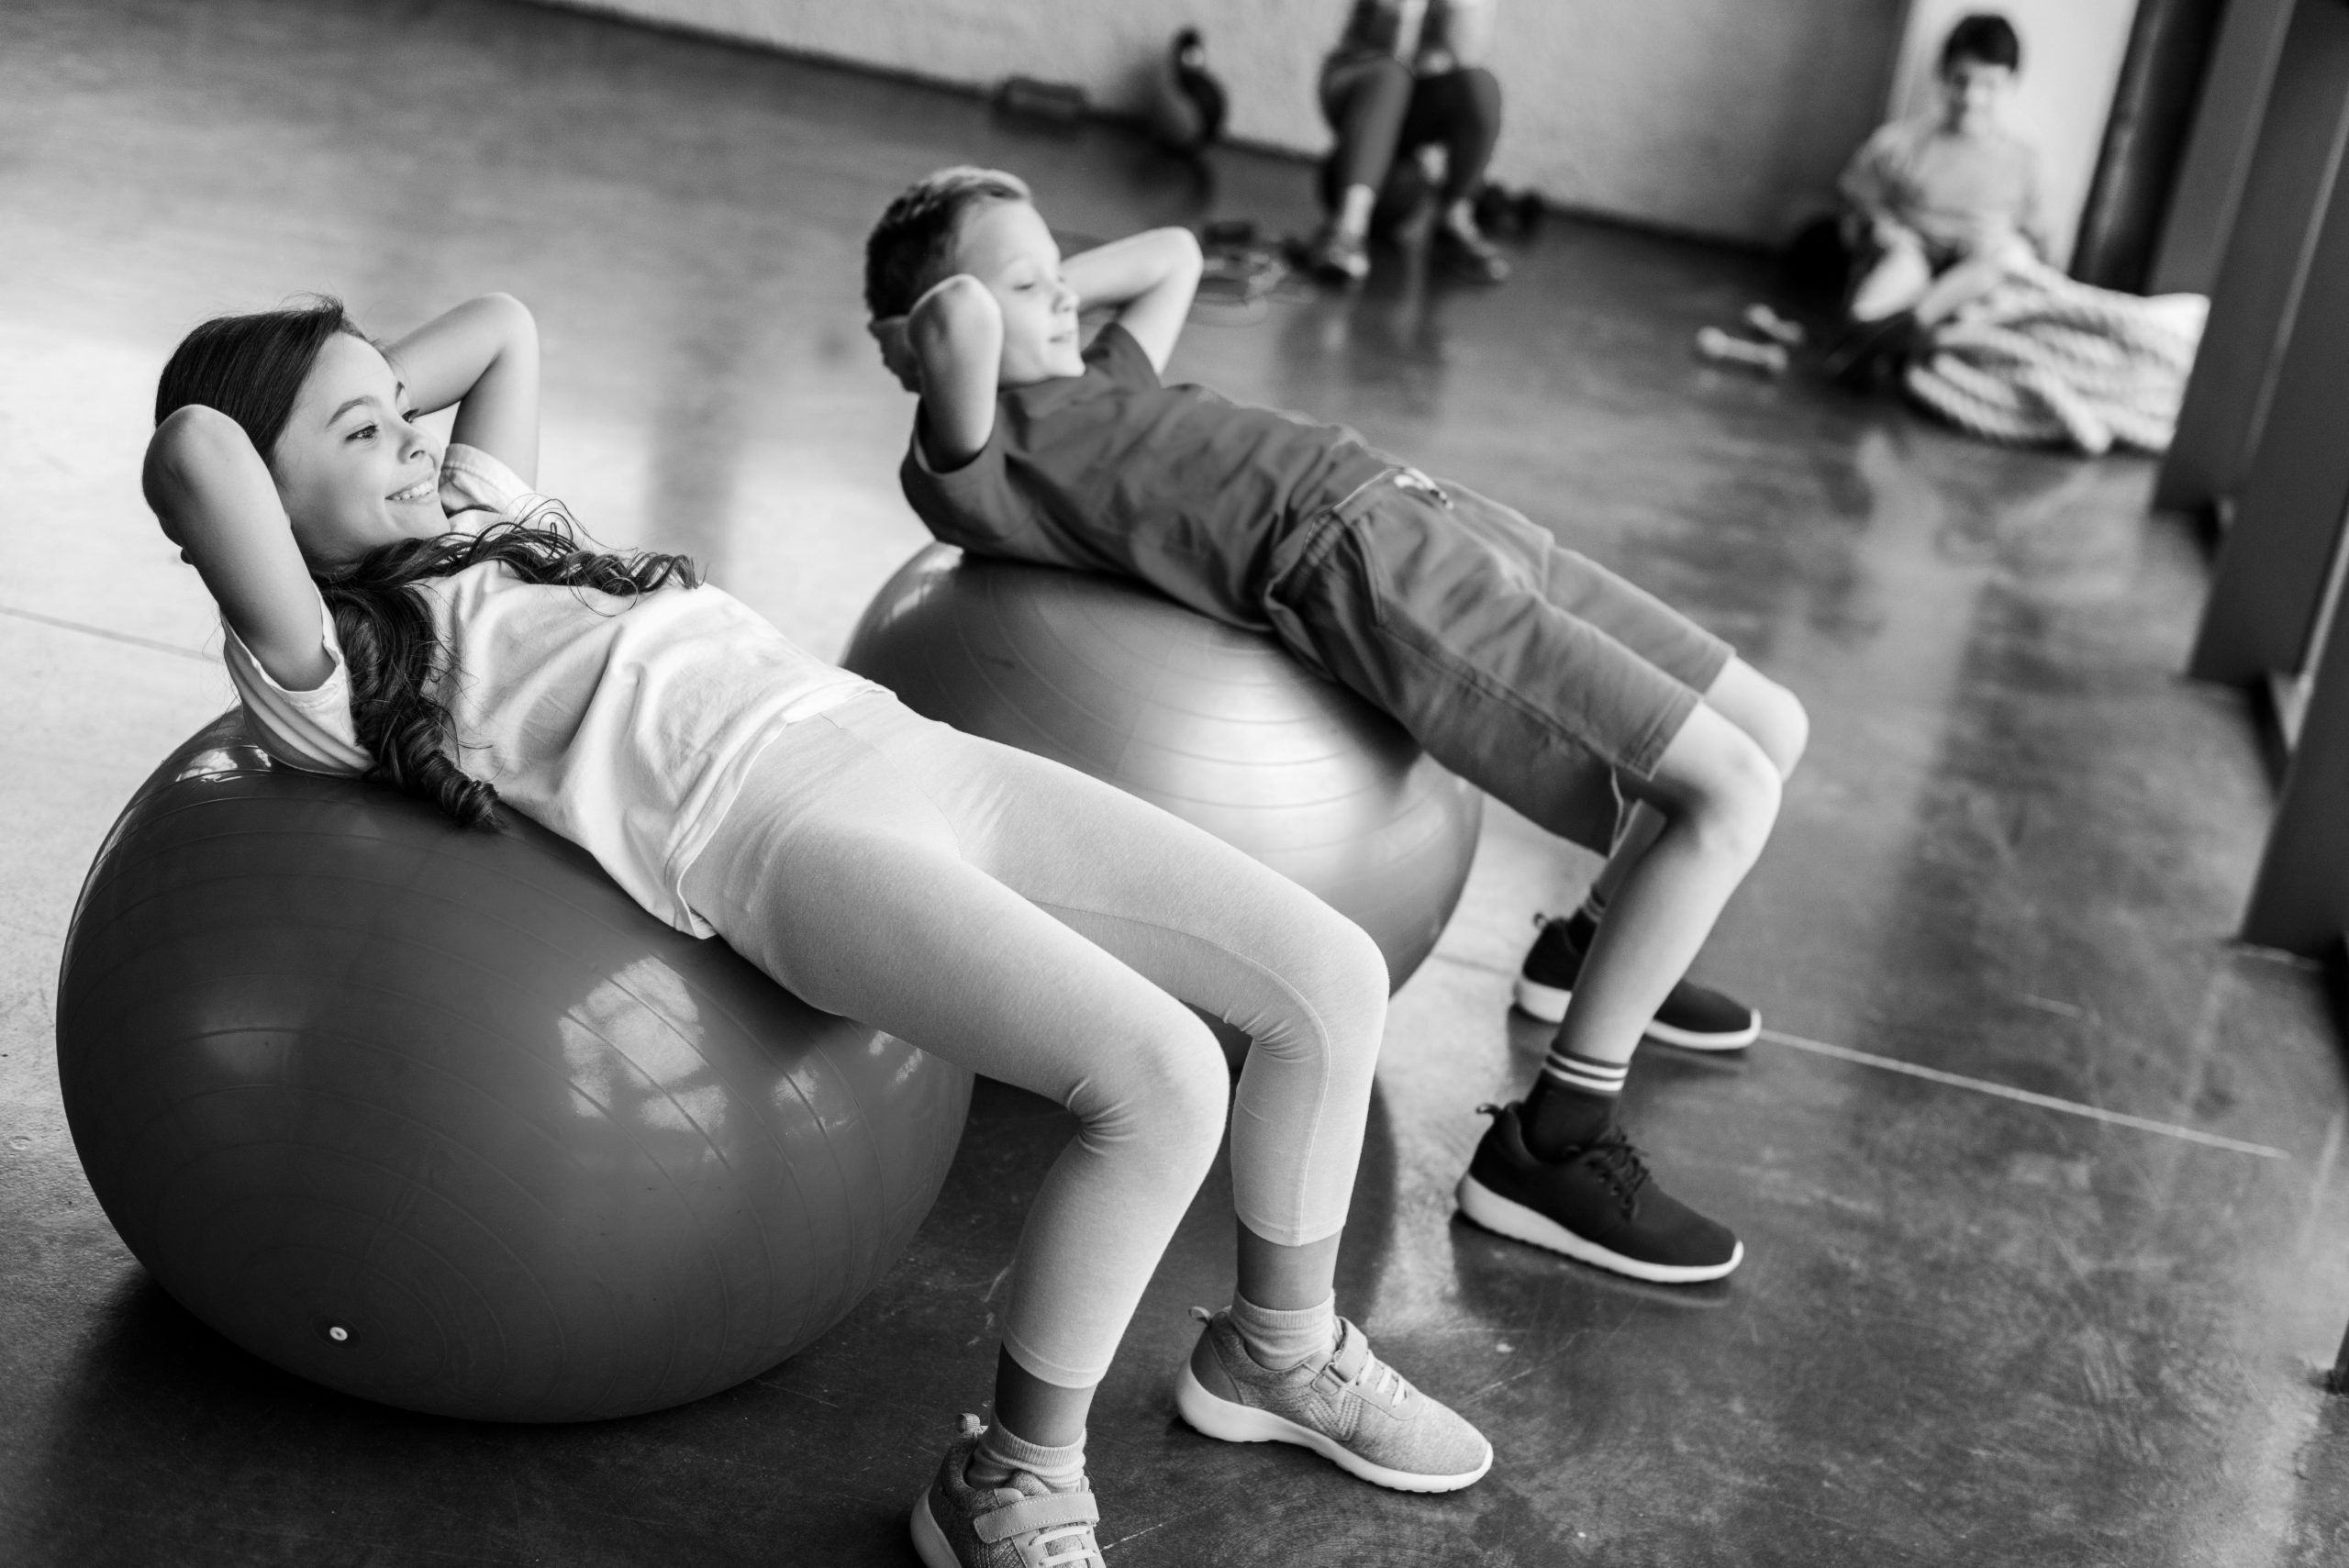 BW-kids-doing-abs-exercise-with-fitness-balls-2021-08-31-13-50-44-utc